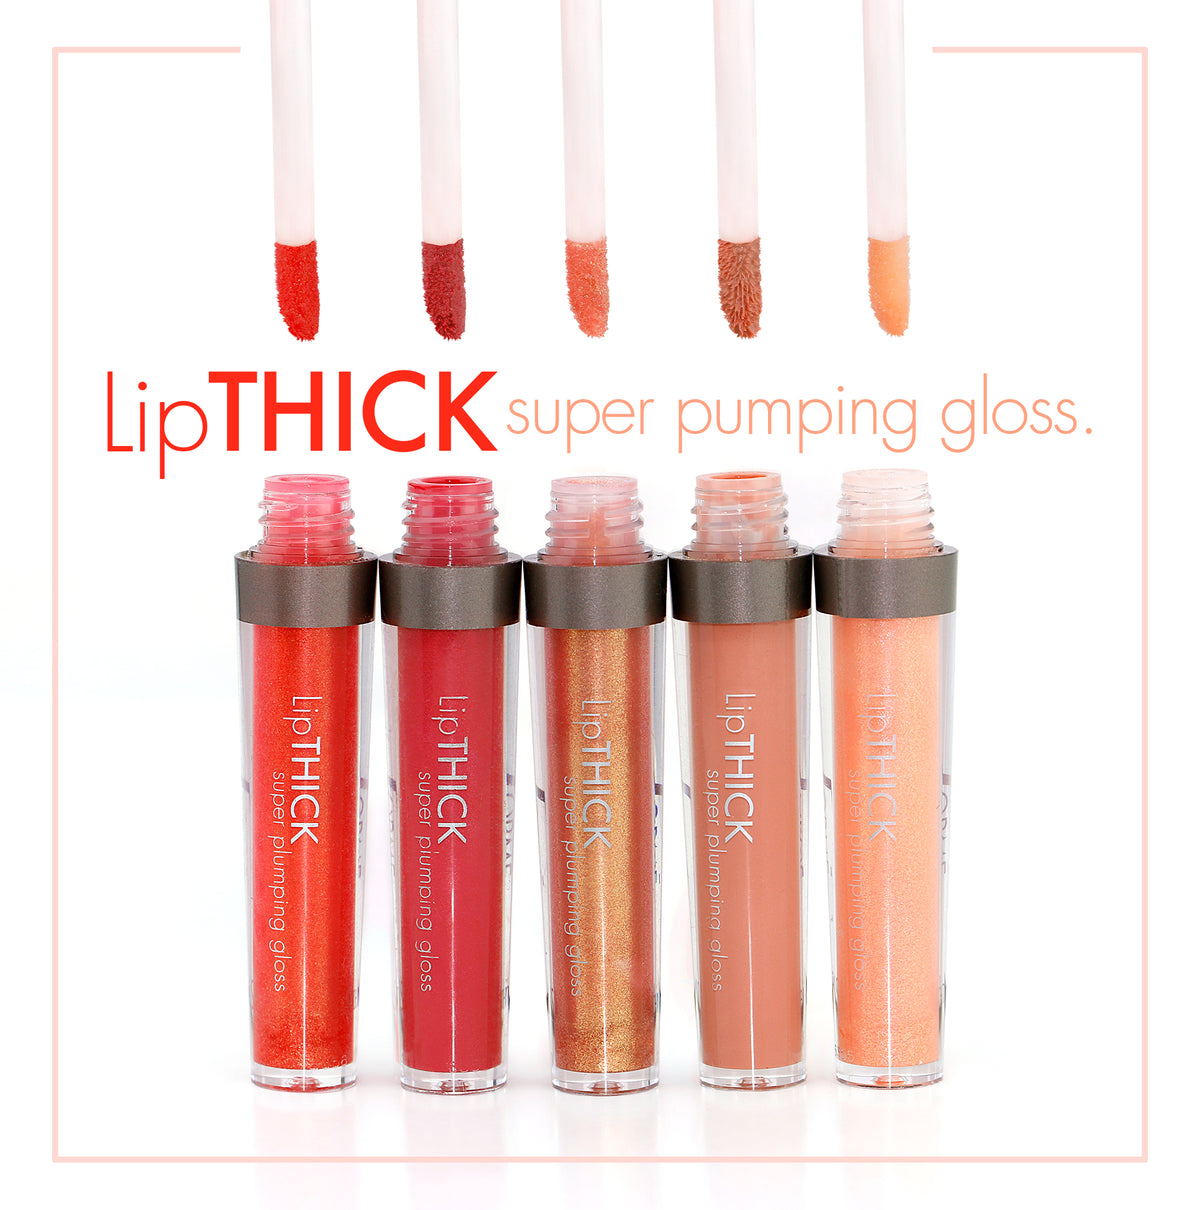 LipThick Plumping Gloss (luscious lips without injections)